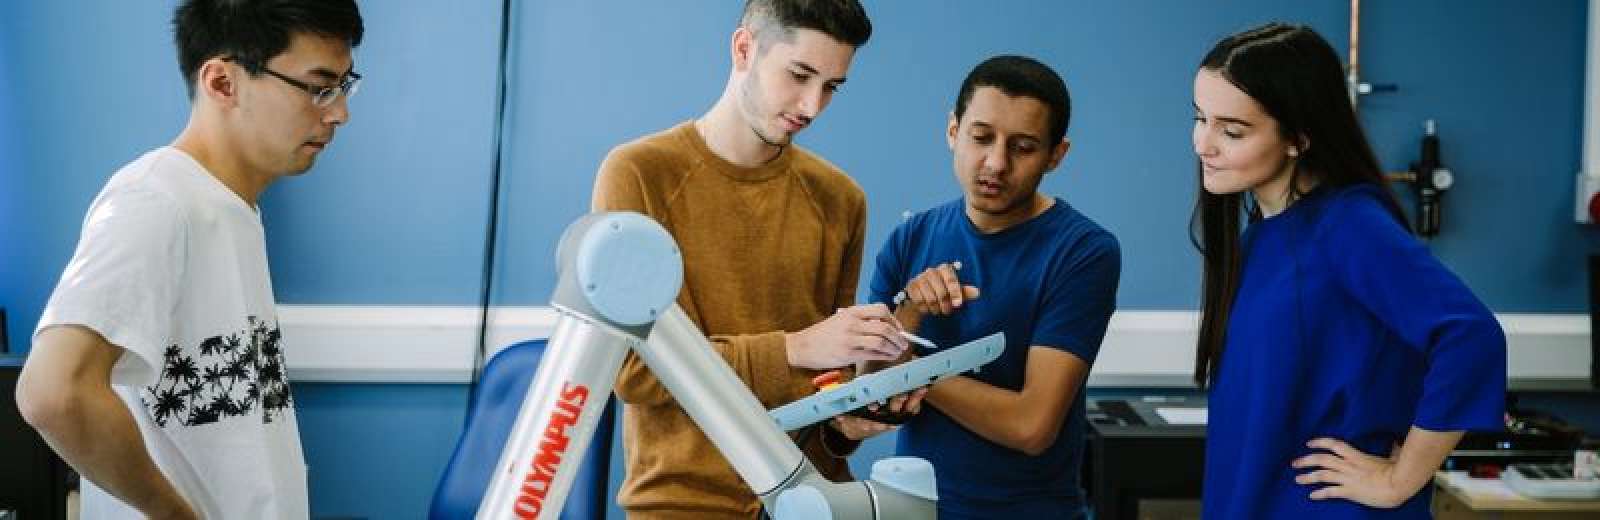 A group of students working in a robotics lab at the University of Leeds.